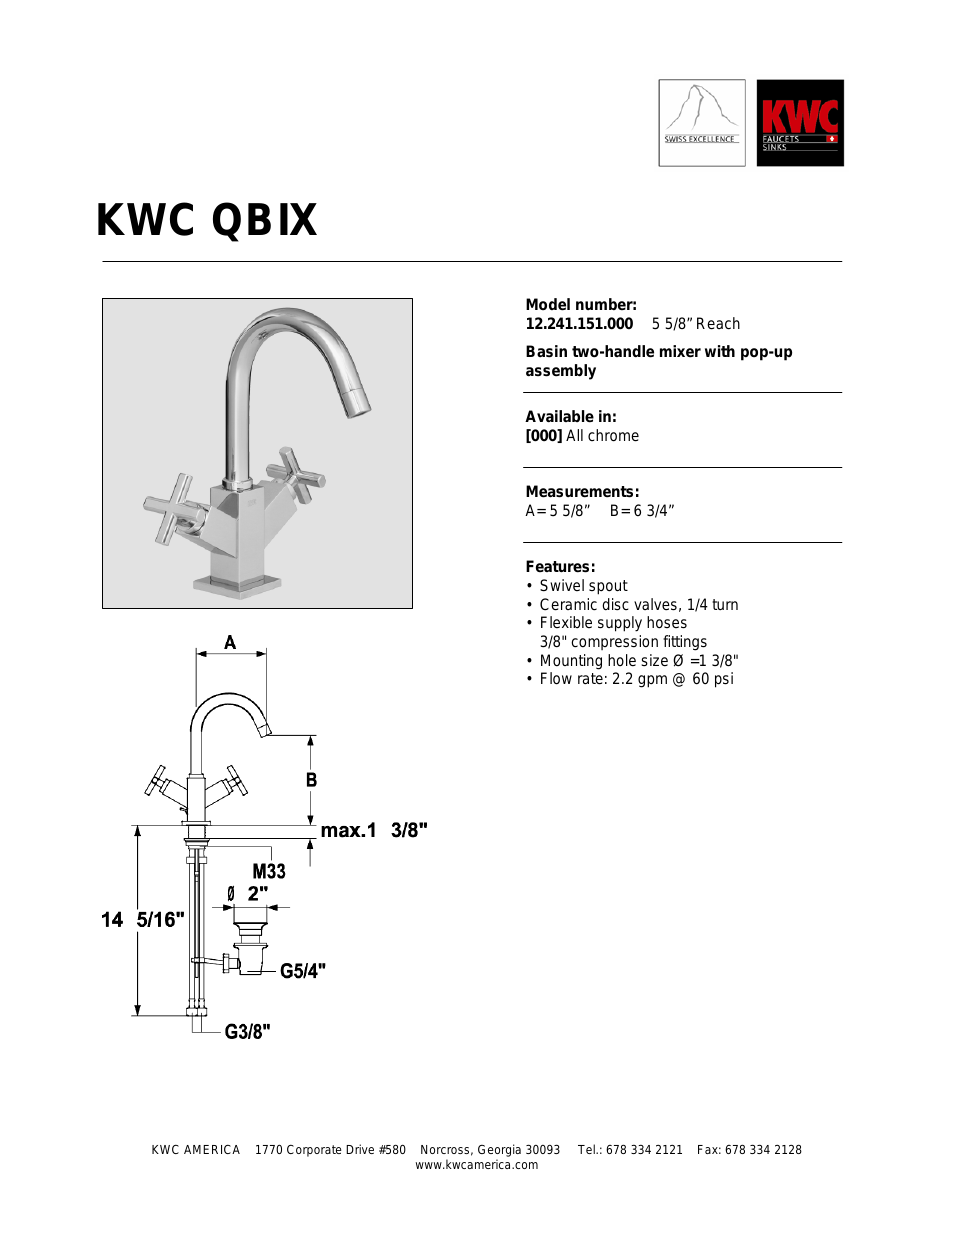 Basin Two-Handle Mixer with Pop-Up Assembly 12.241.151.000